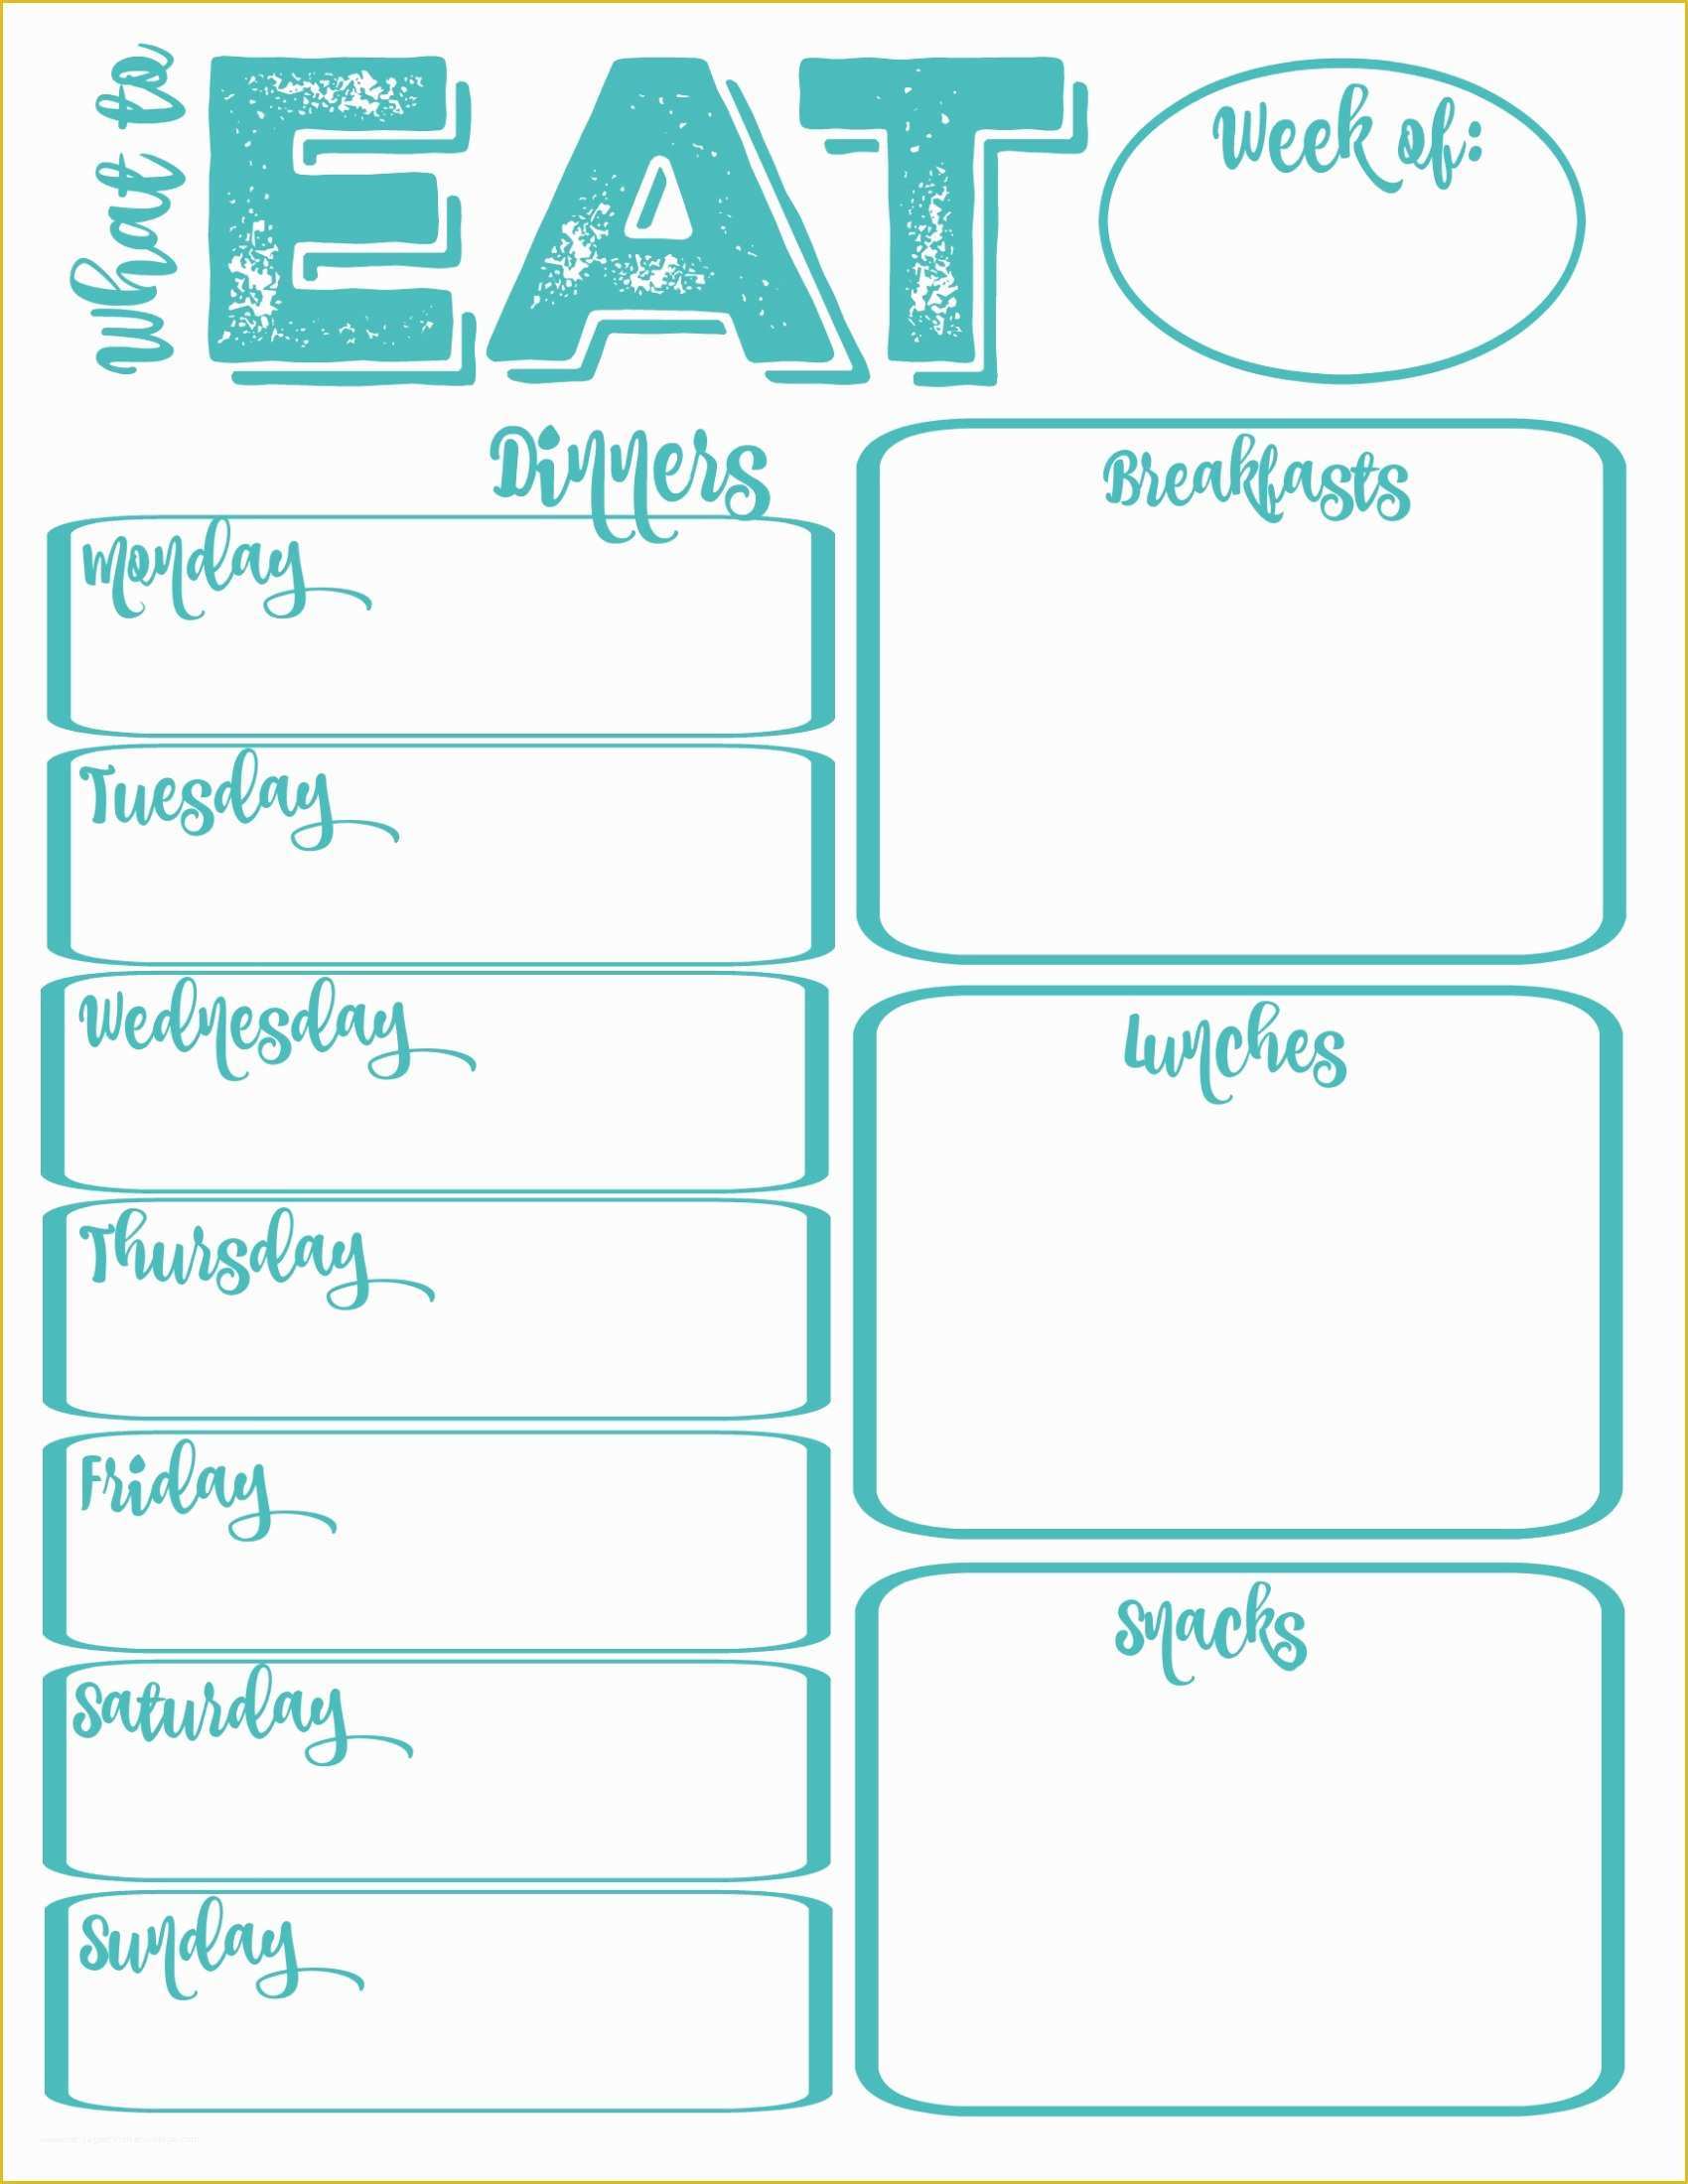 Free Weekly Meal Planner Template with Grocery List Of Pantry Makeover Free Printable Weekly Meal Planner and